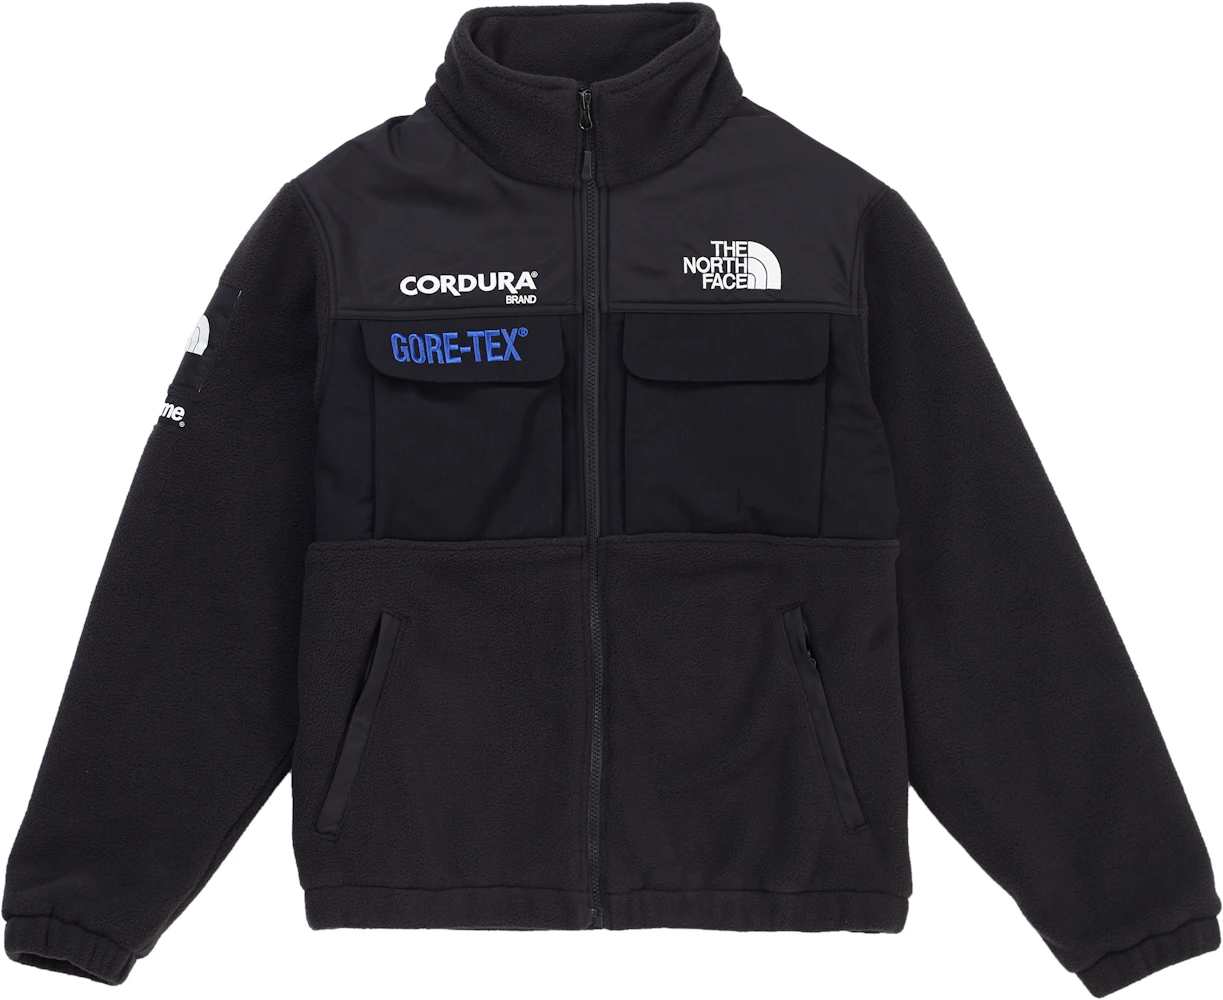 Supreme x The North Face Fleece Collection